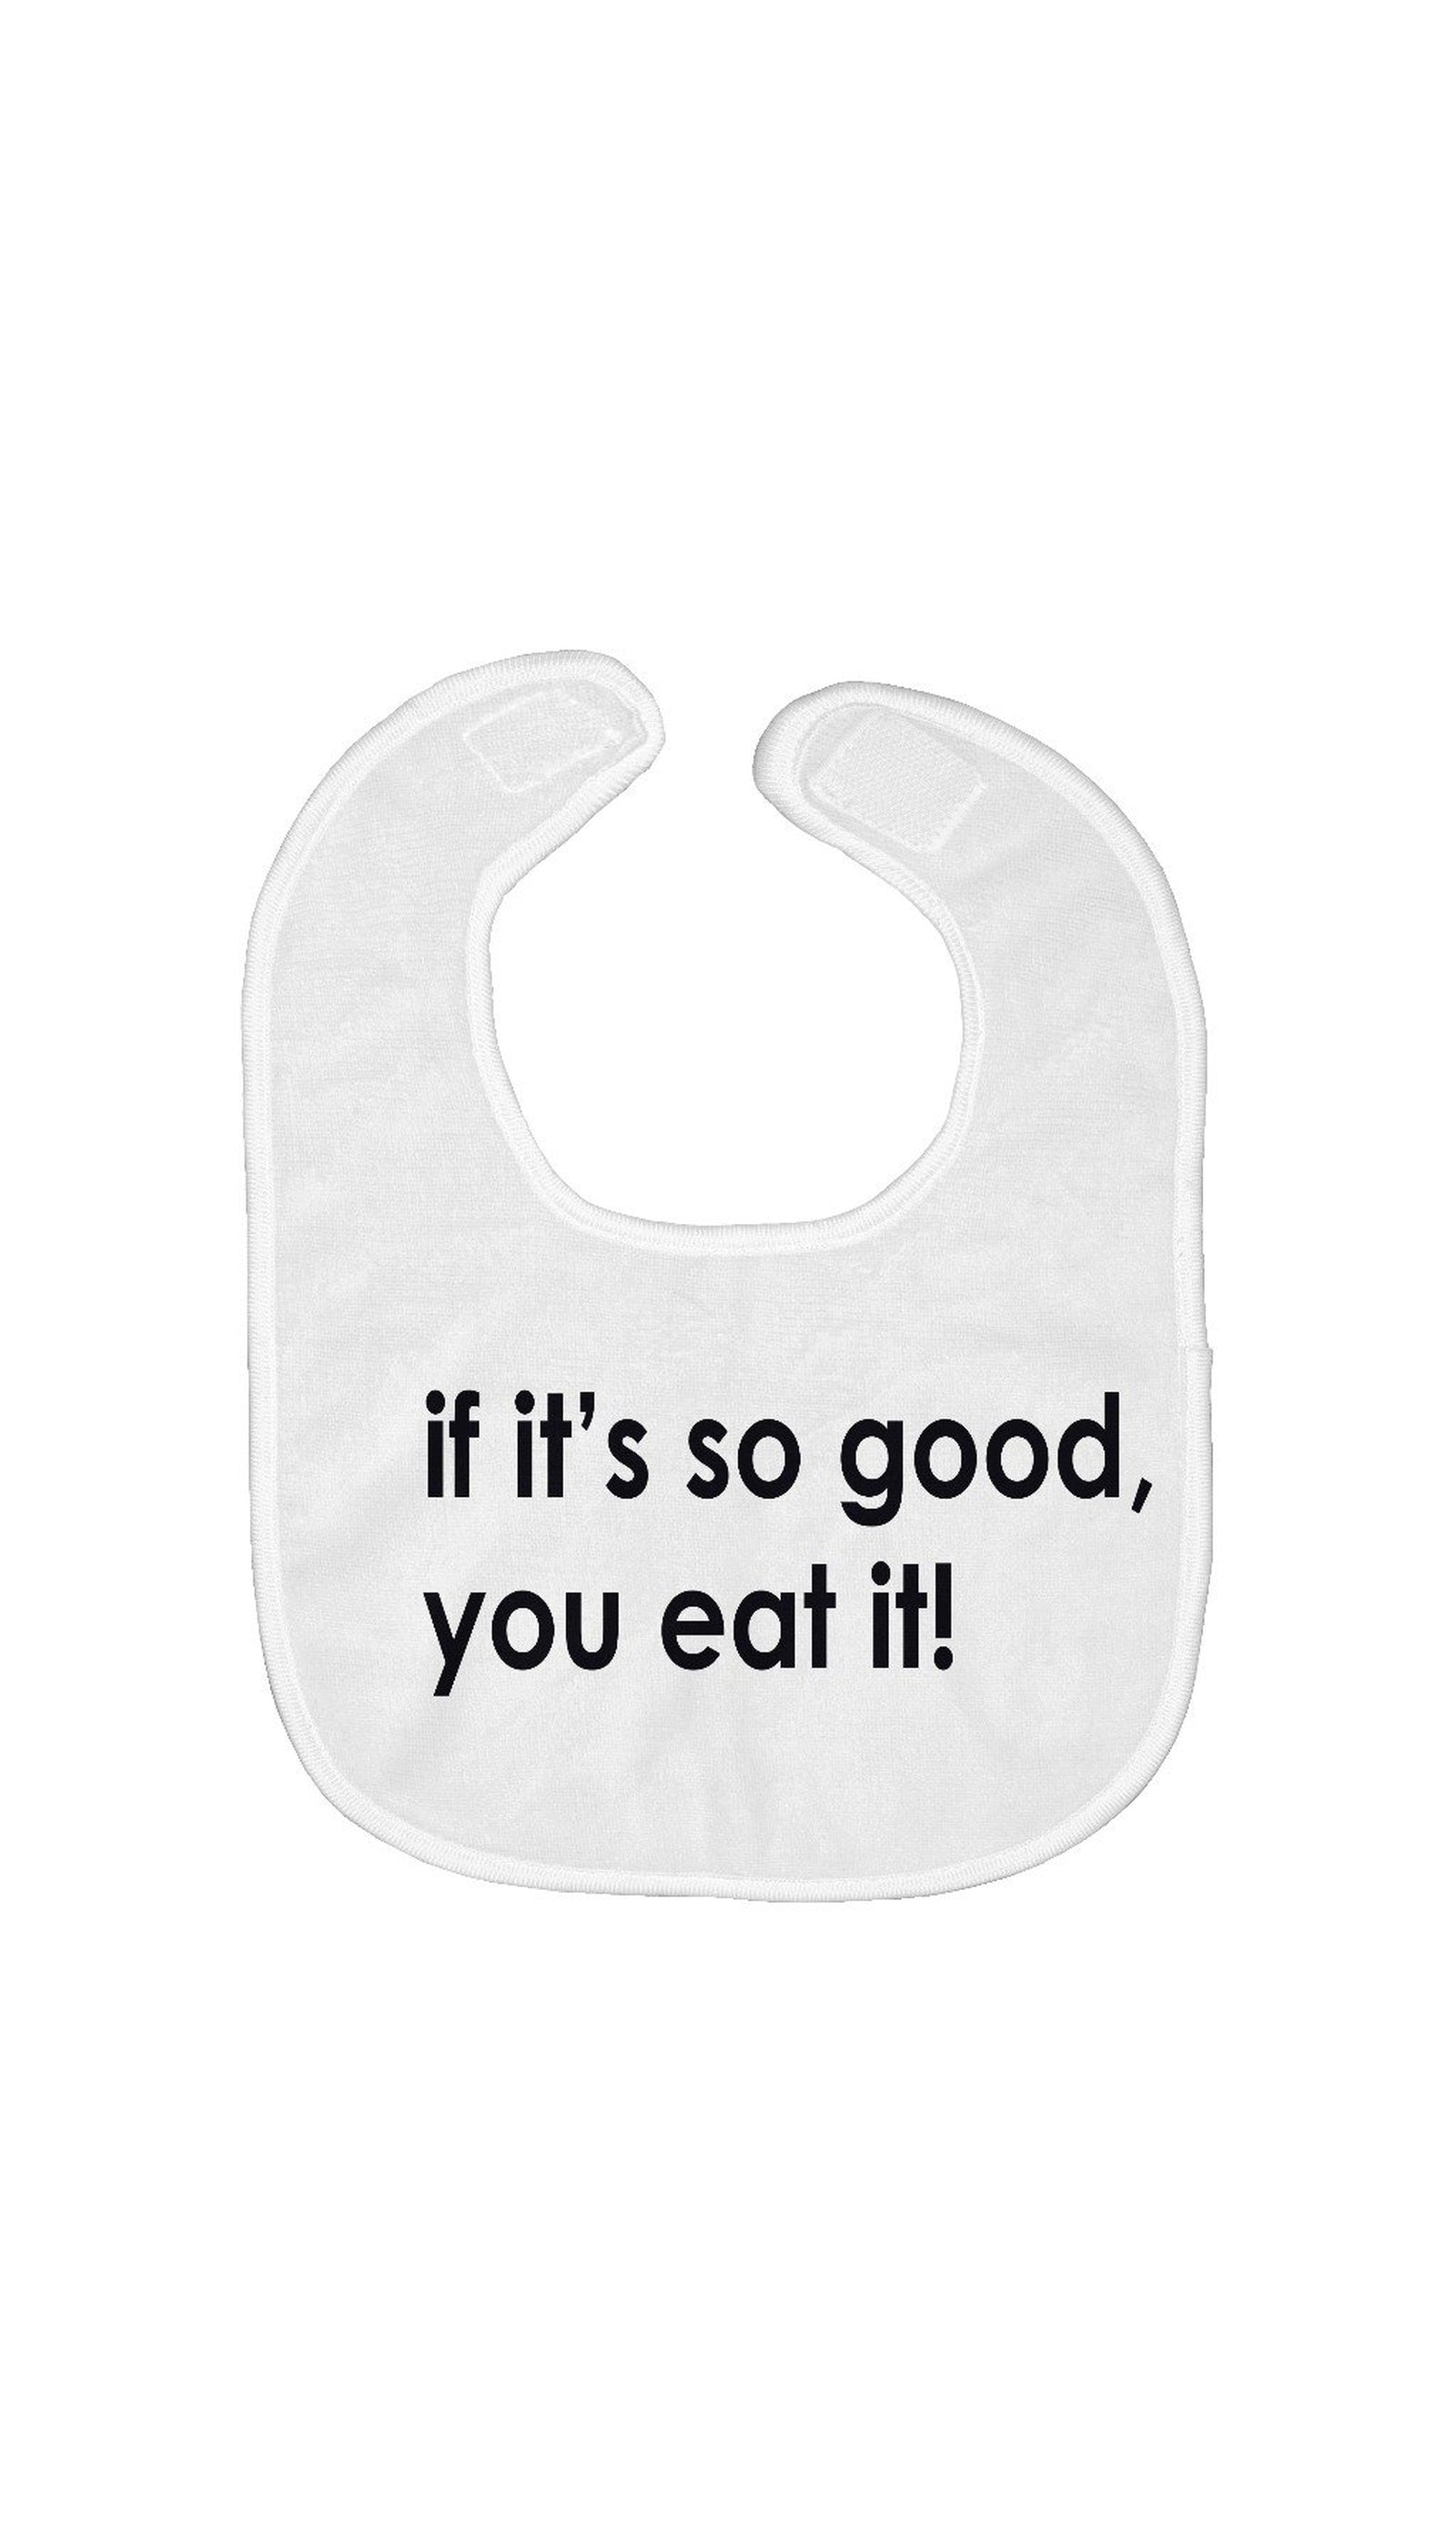 Cute and Funny Baby Bibs | Hilarious & Clever Baby Bibs – Sarcastic ME